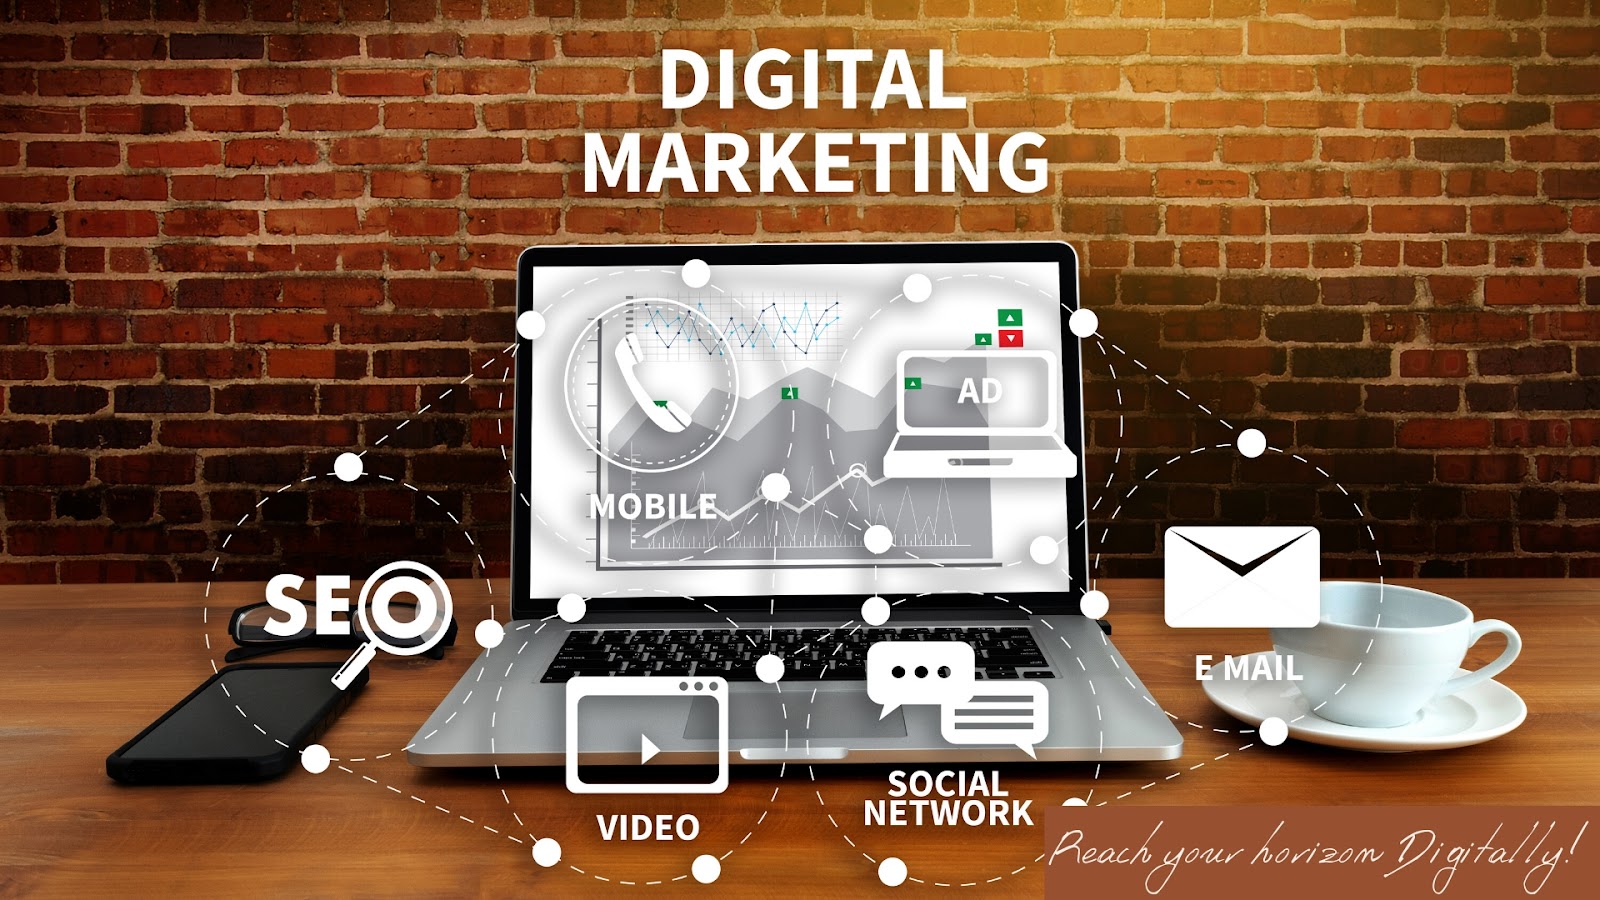 What is Digital Marketing all about?